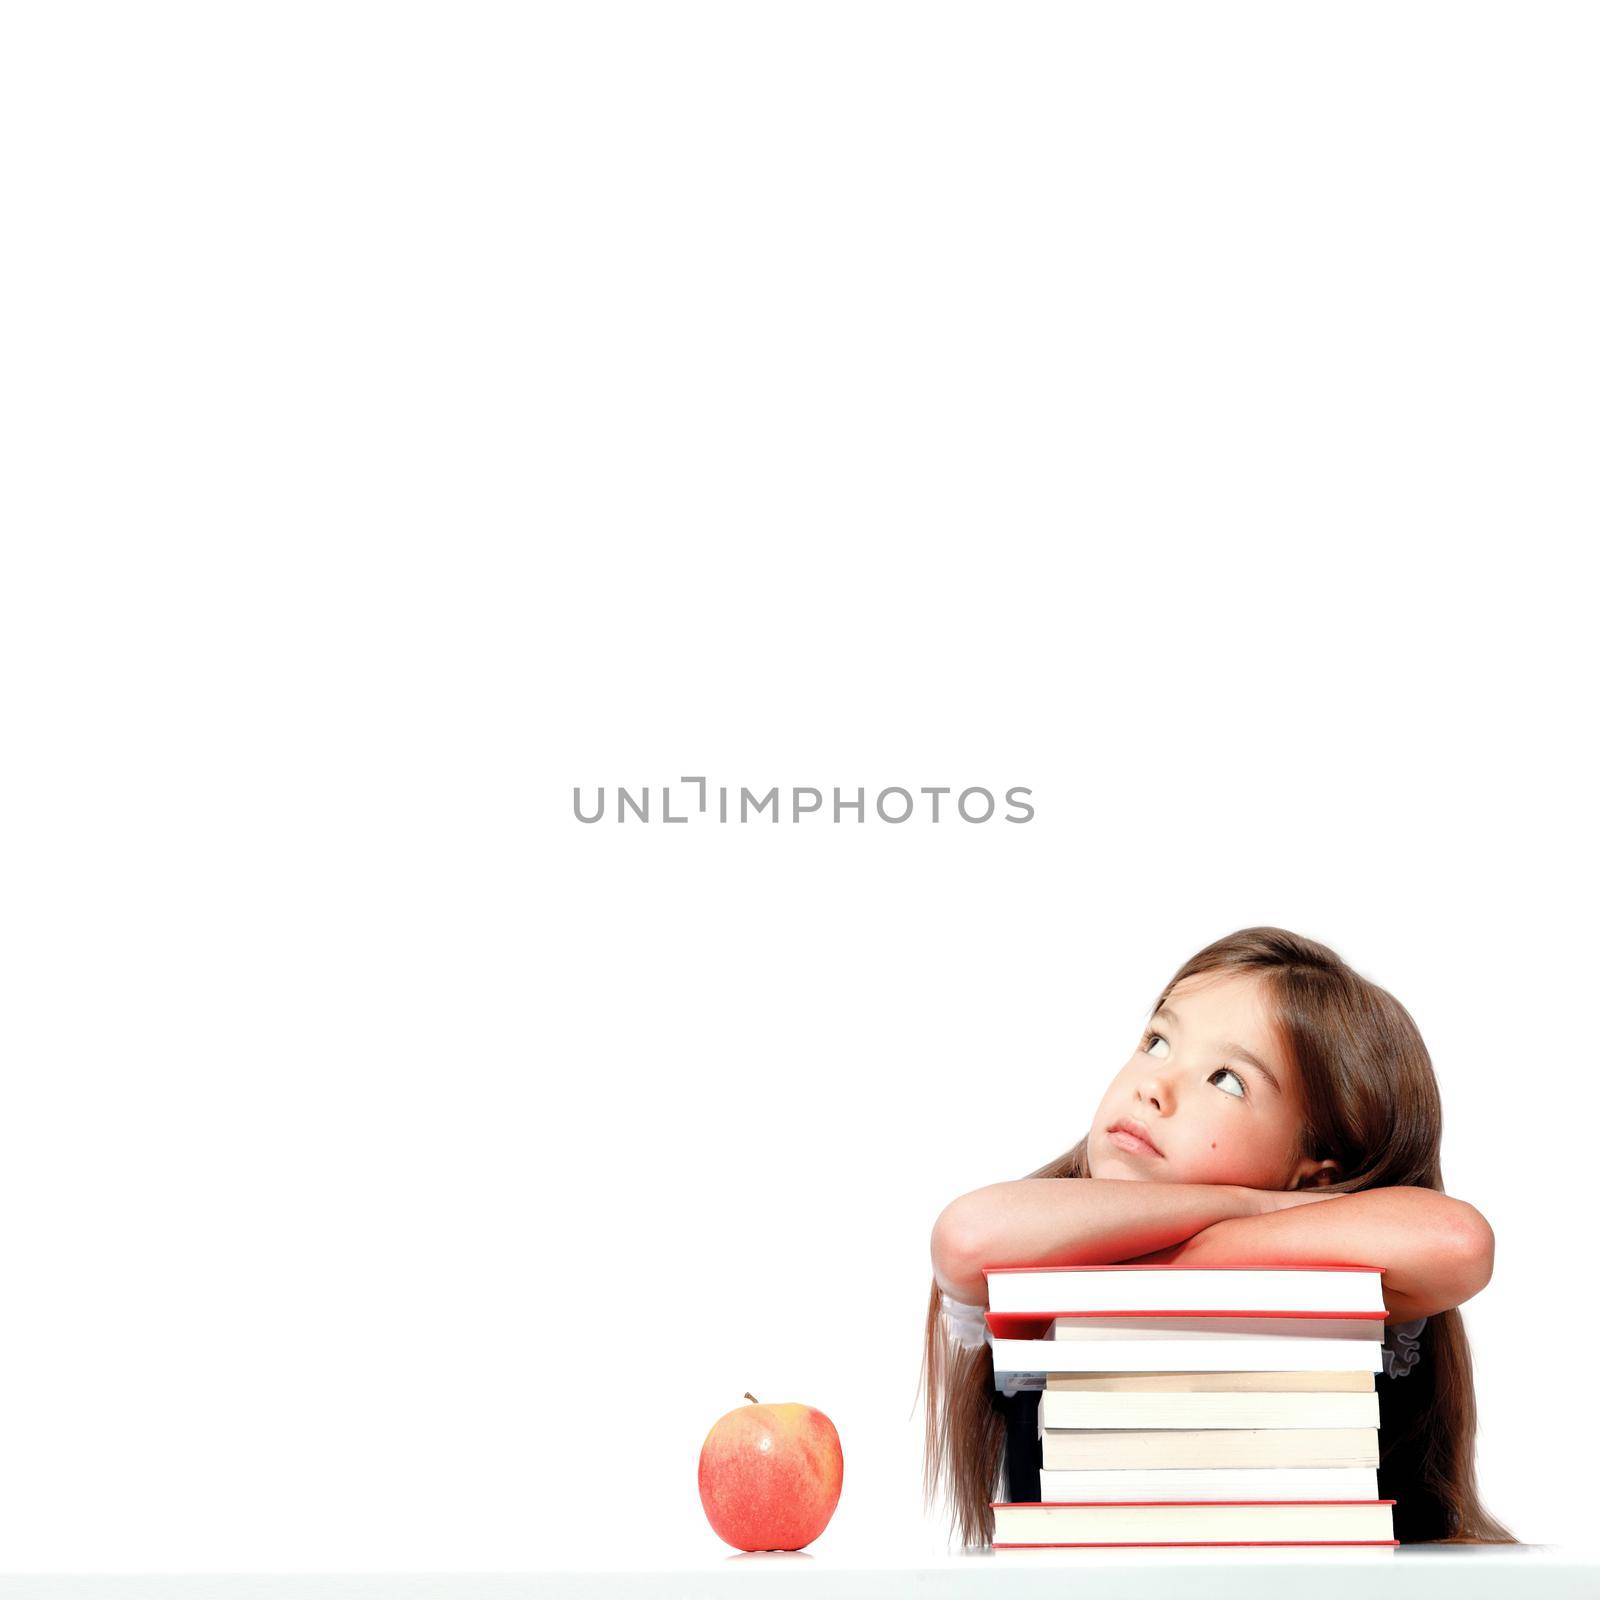 Cute little child girl looking up on the desk at school. by Taut